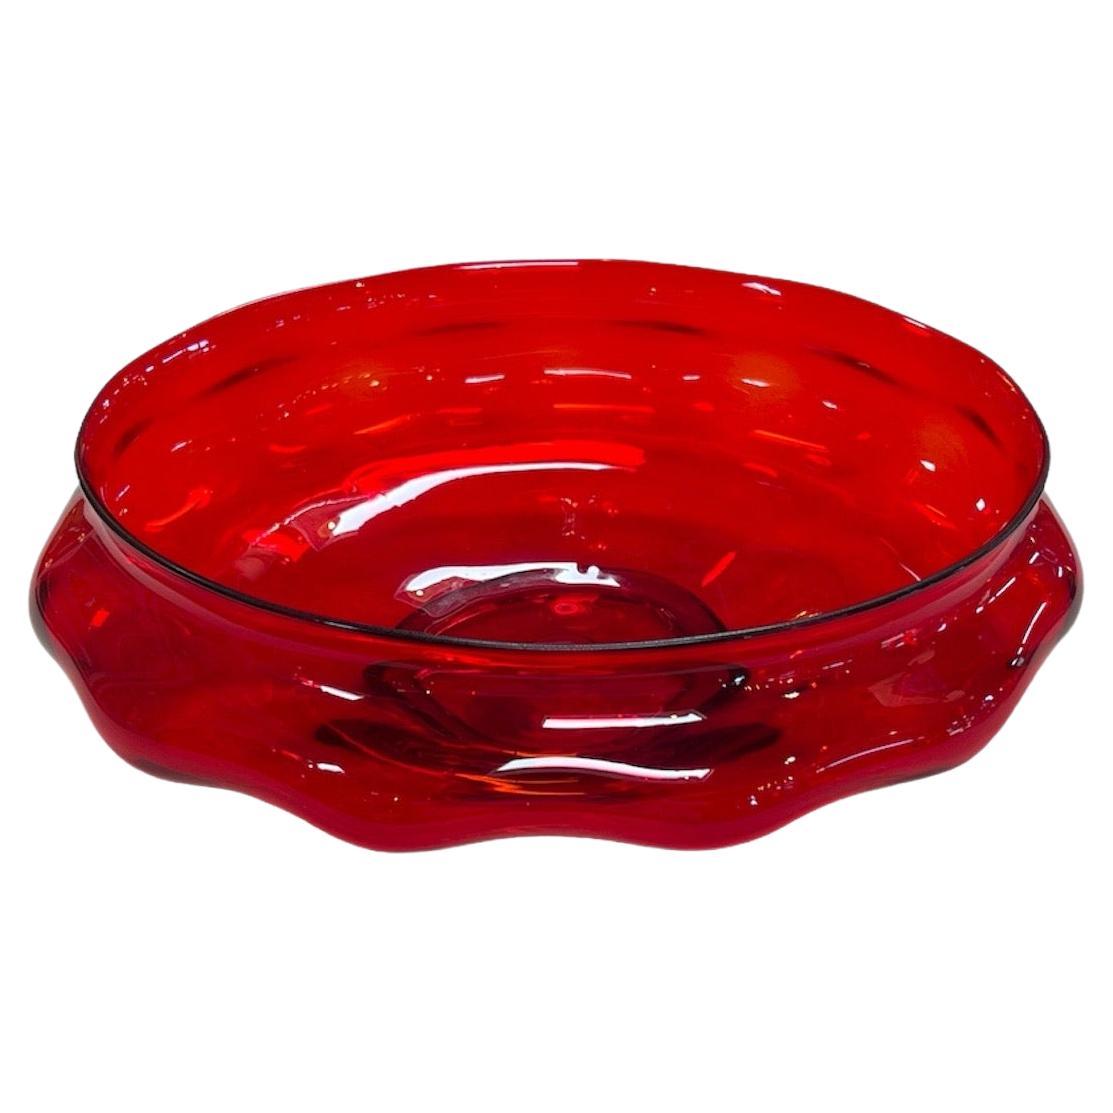 Beautiful Vintage Italian Round Decorative Red Bowl 1980 For Sale